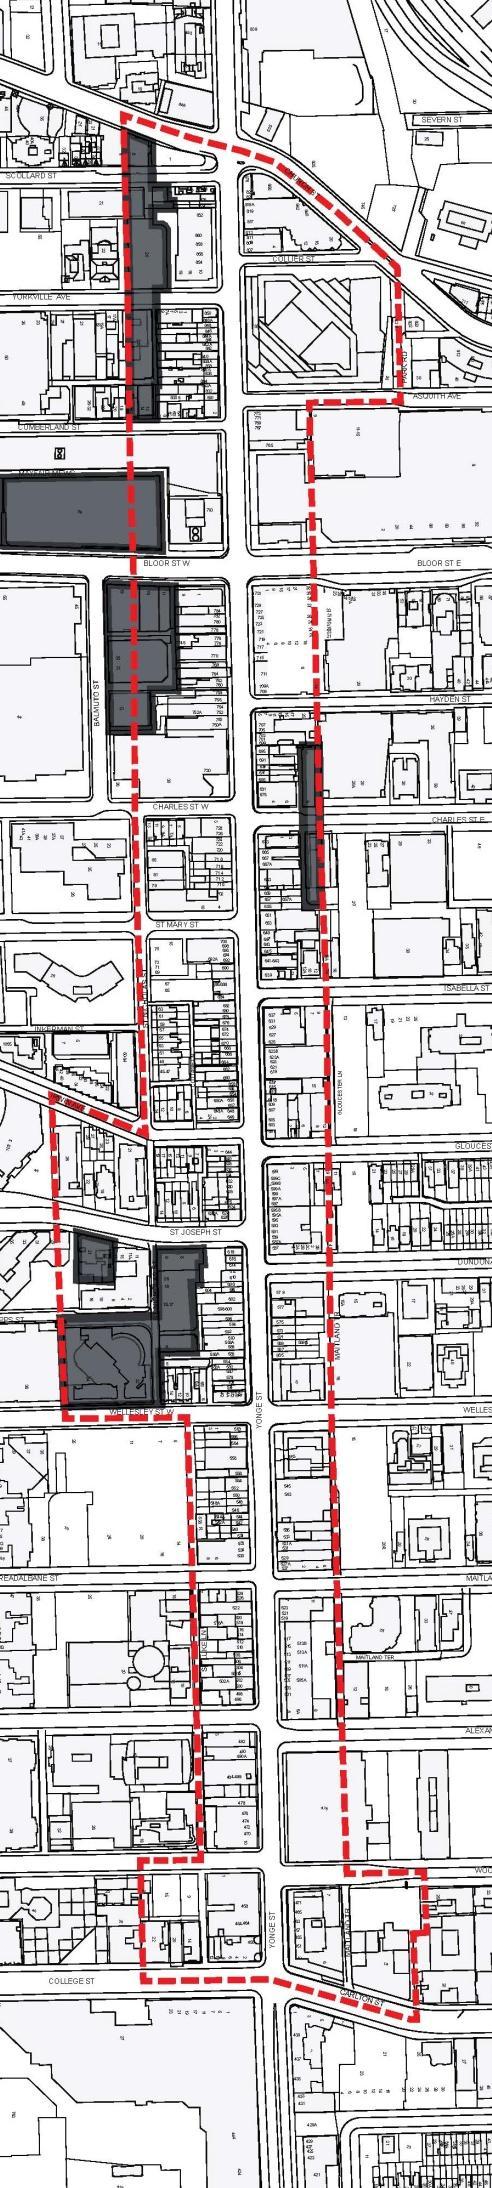 5 Not consistent with a character area Includes properties that reflect a built form prevalent within the areas east and west of Yonge